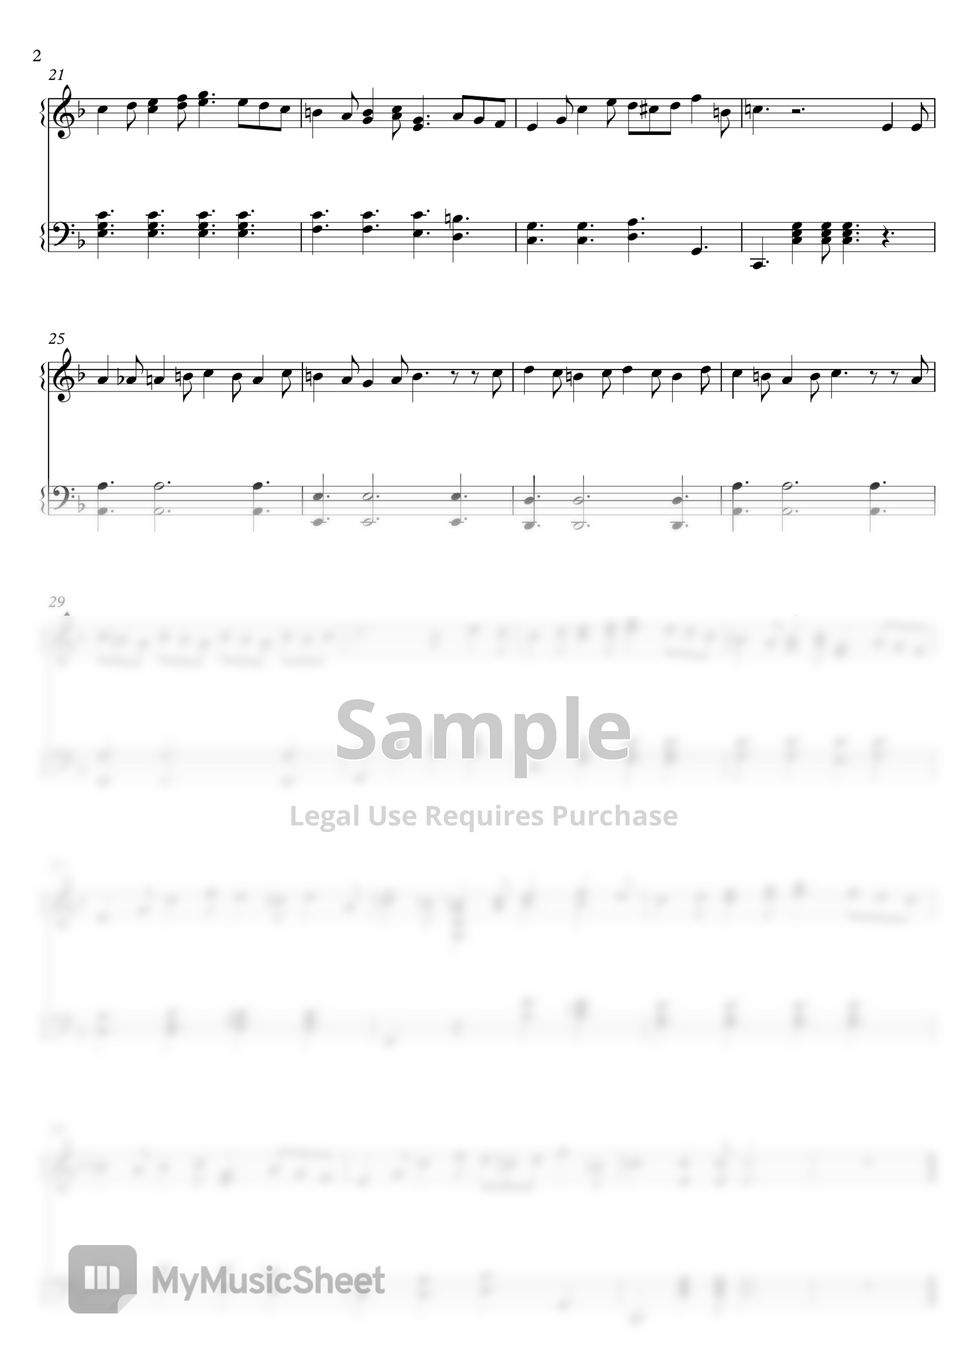 Les Misérables - Do You Hear the People Sing? (Easy Sheet) by C Music